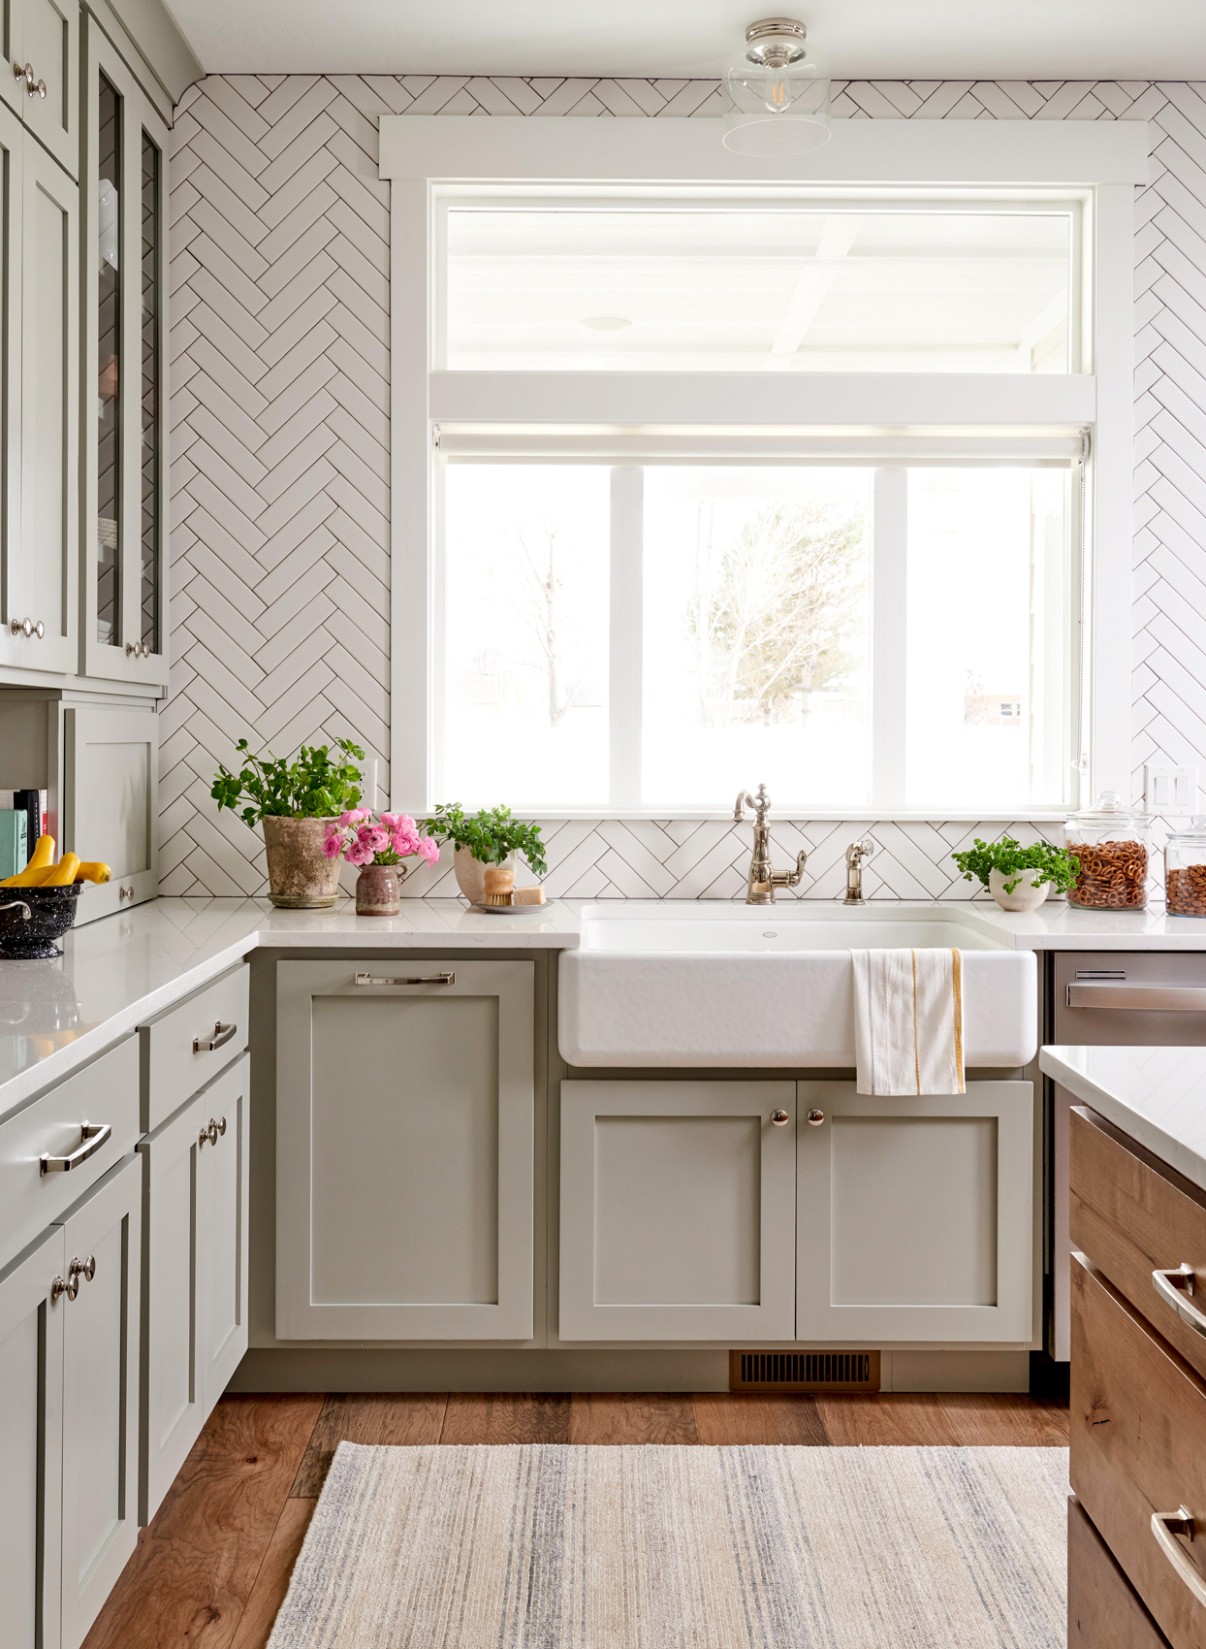 5 Winning Kitchen Color Schemes for a Look You